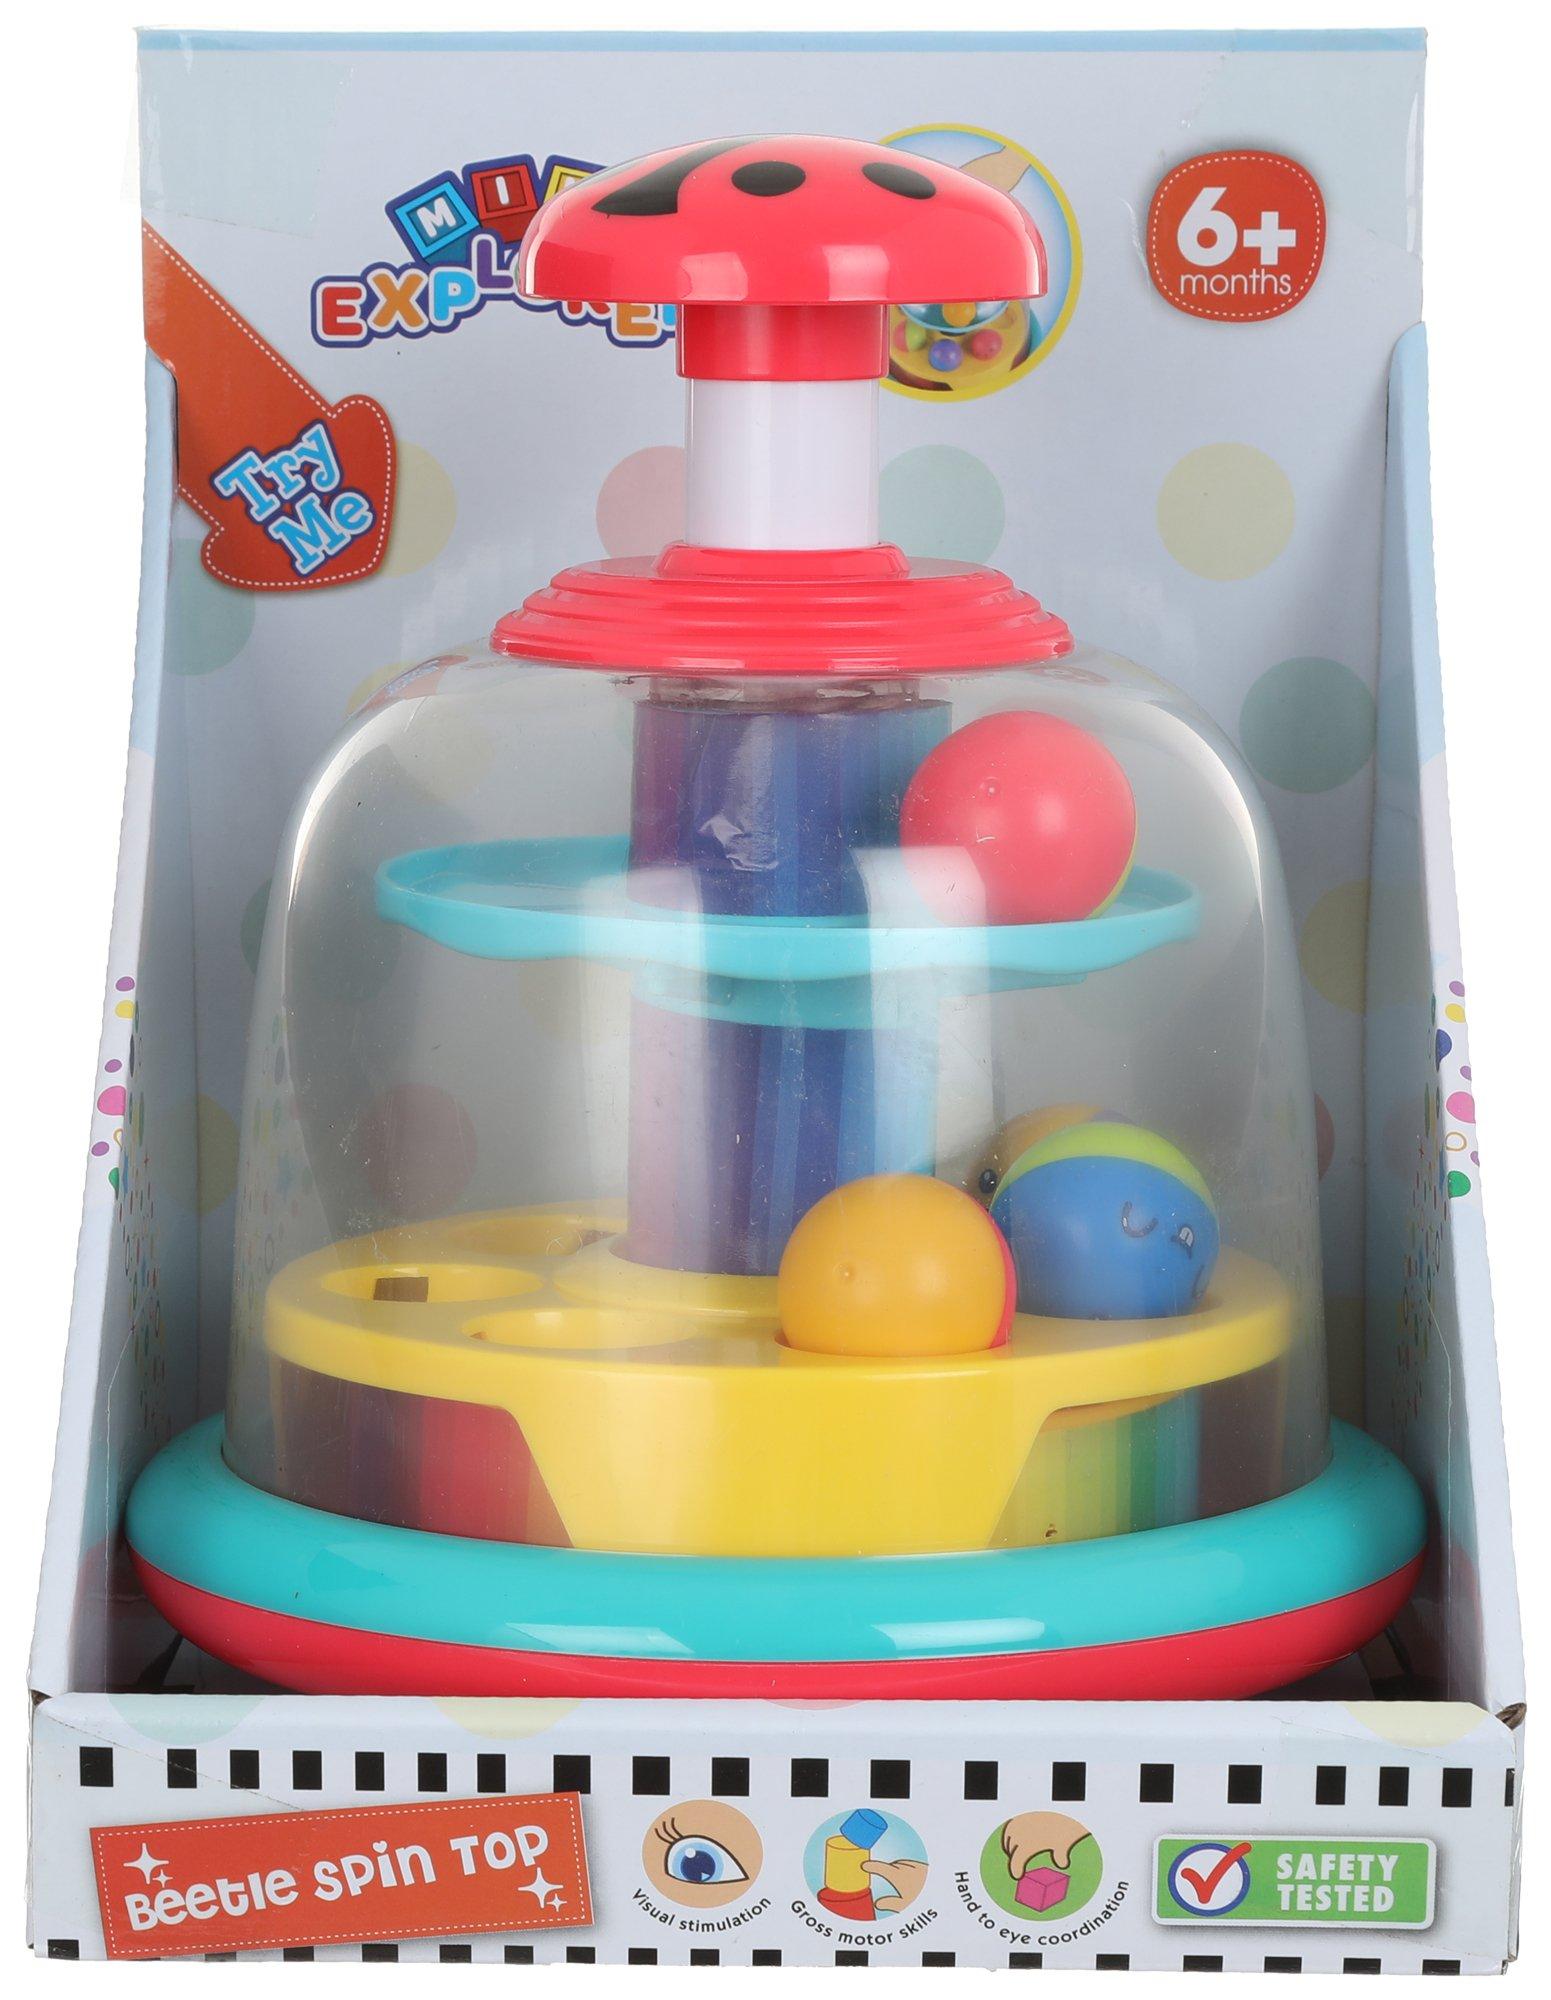 Beetle Spin Top Baby Toy